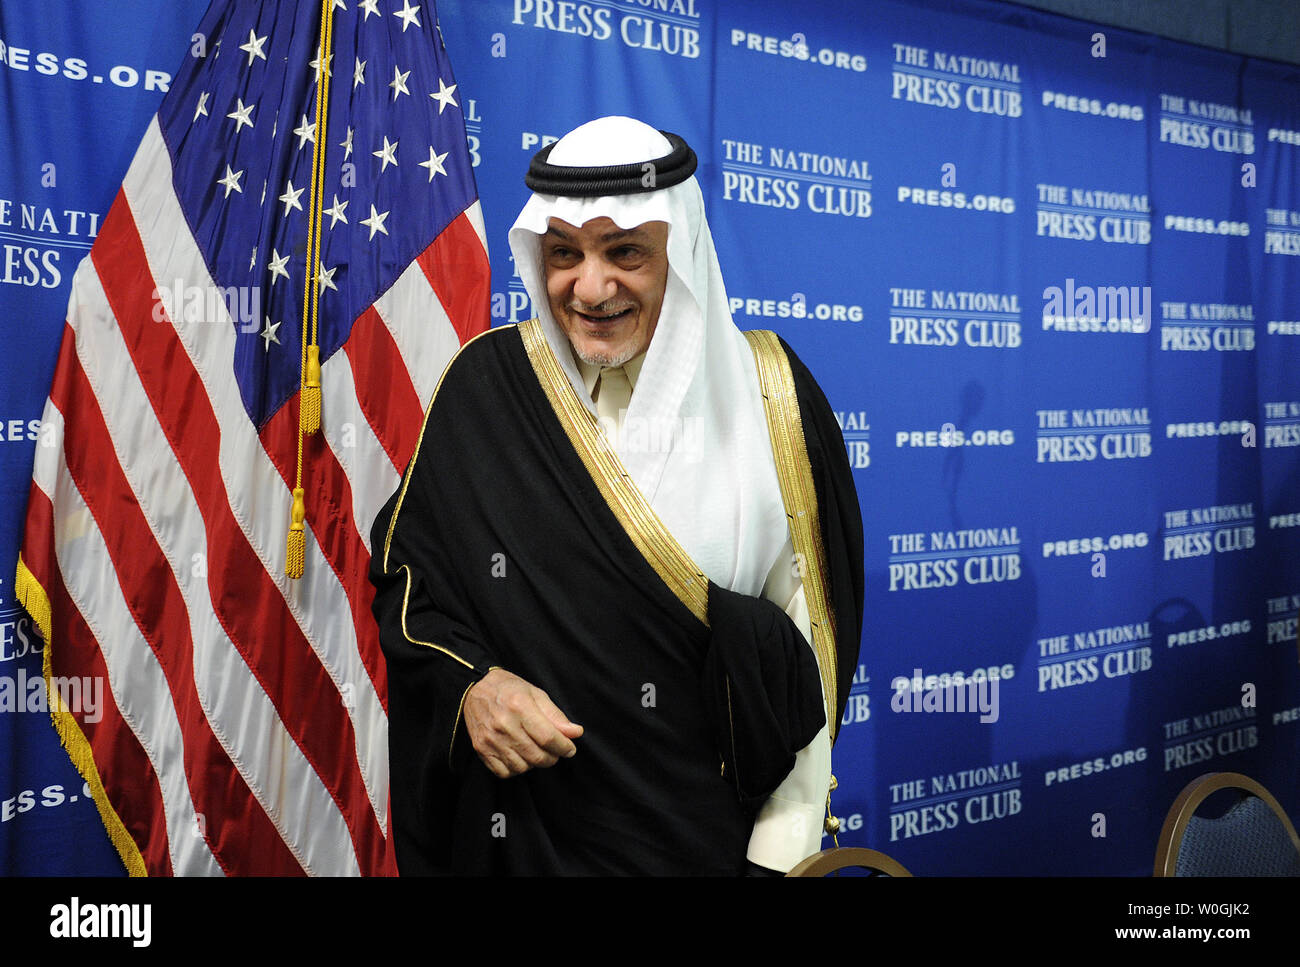 Prince Turki Al Faisal of Saudi Arabia, former director general of the Saudi General Intelligence Directorate and former Saudi ambassador to the United States, discusses the alleged Iranian plot to assassinate the Saudi Arabian ambassador to the Unite States; the evolving role and rights of women in Saudi Arabia, including King Abdullah's decision to grant women the right to vote in 2015; and Saudi Arabia's support for Palestinian UN membership and statehood recognition during a news conference at the National Press Club in Washington on November 15, 2011.   UPI/Roger L. Wollenberg Stock Photo